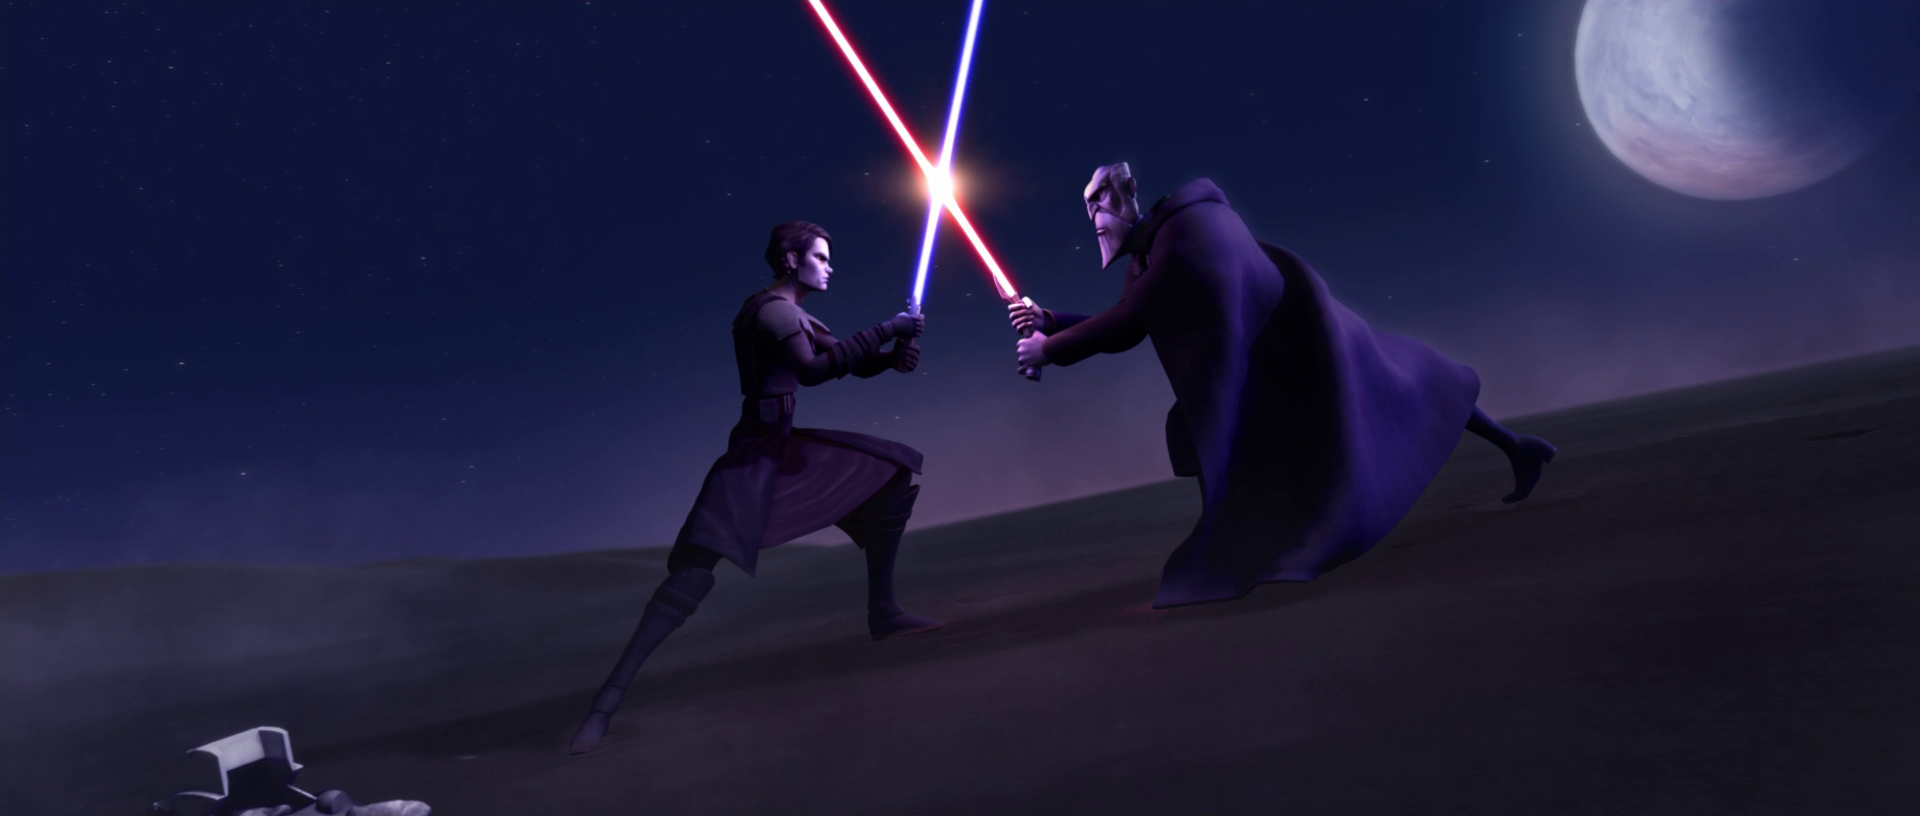 Star Wars This Is Madness Darth Vader vs Count Dooku